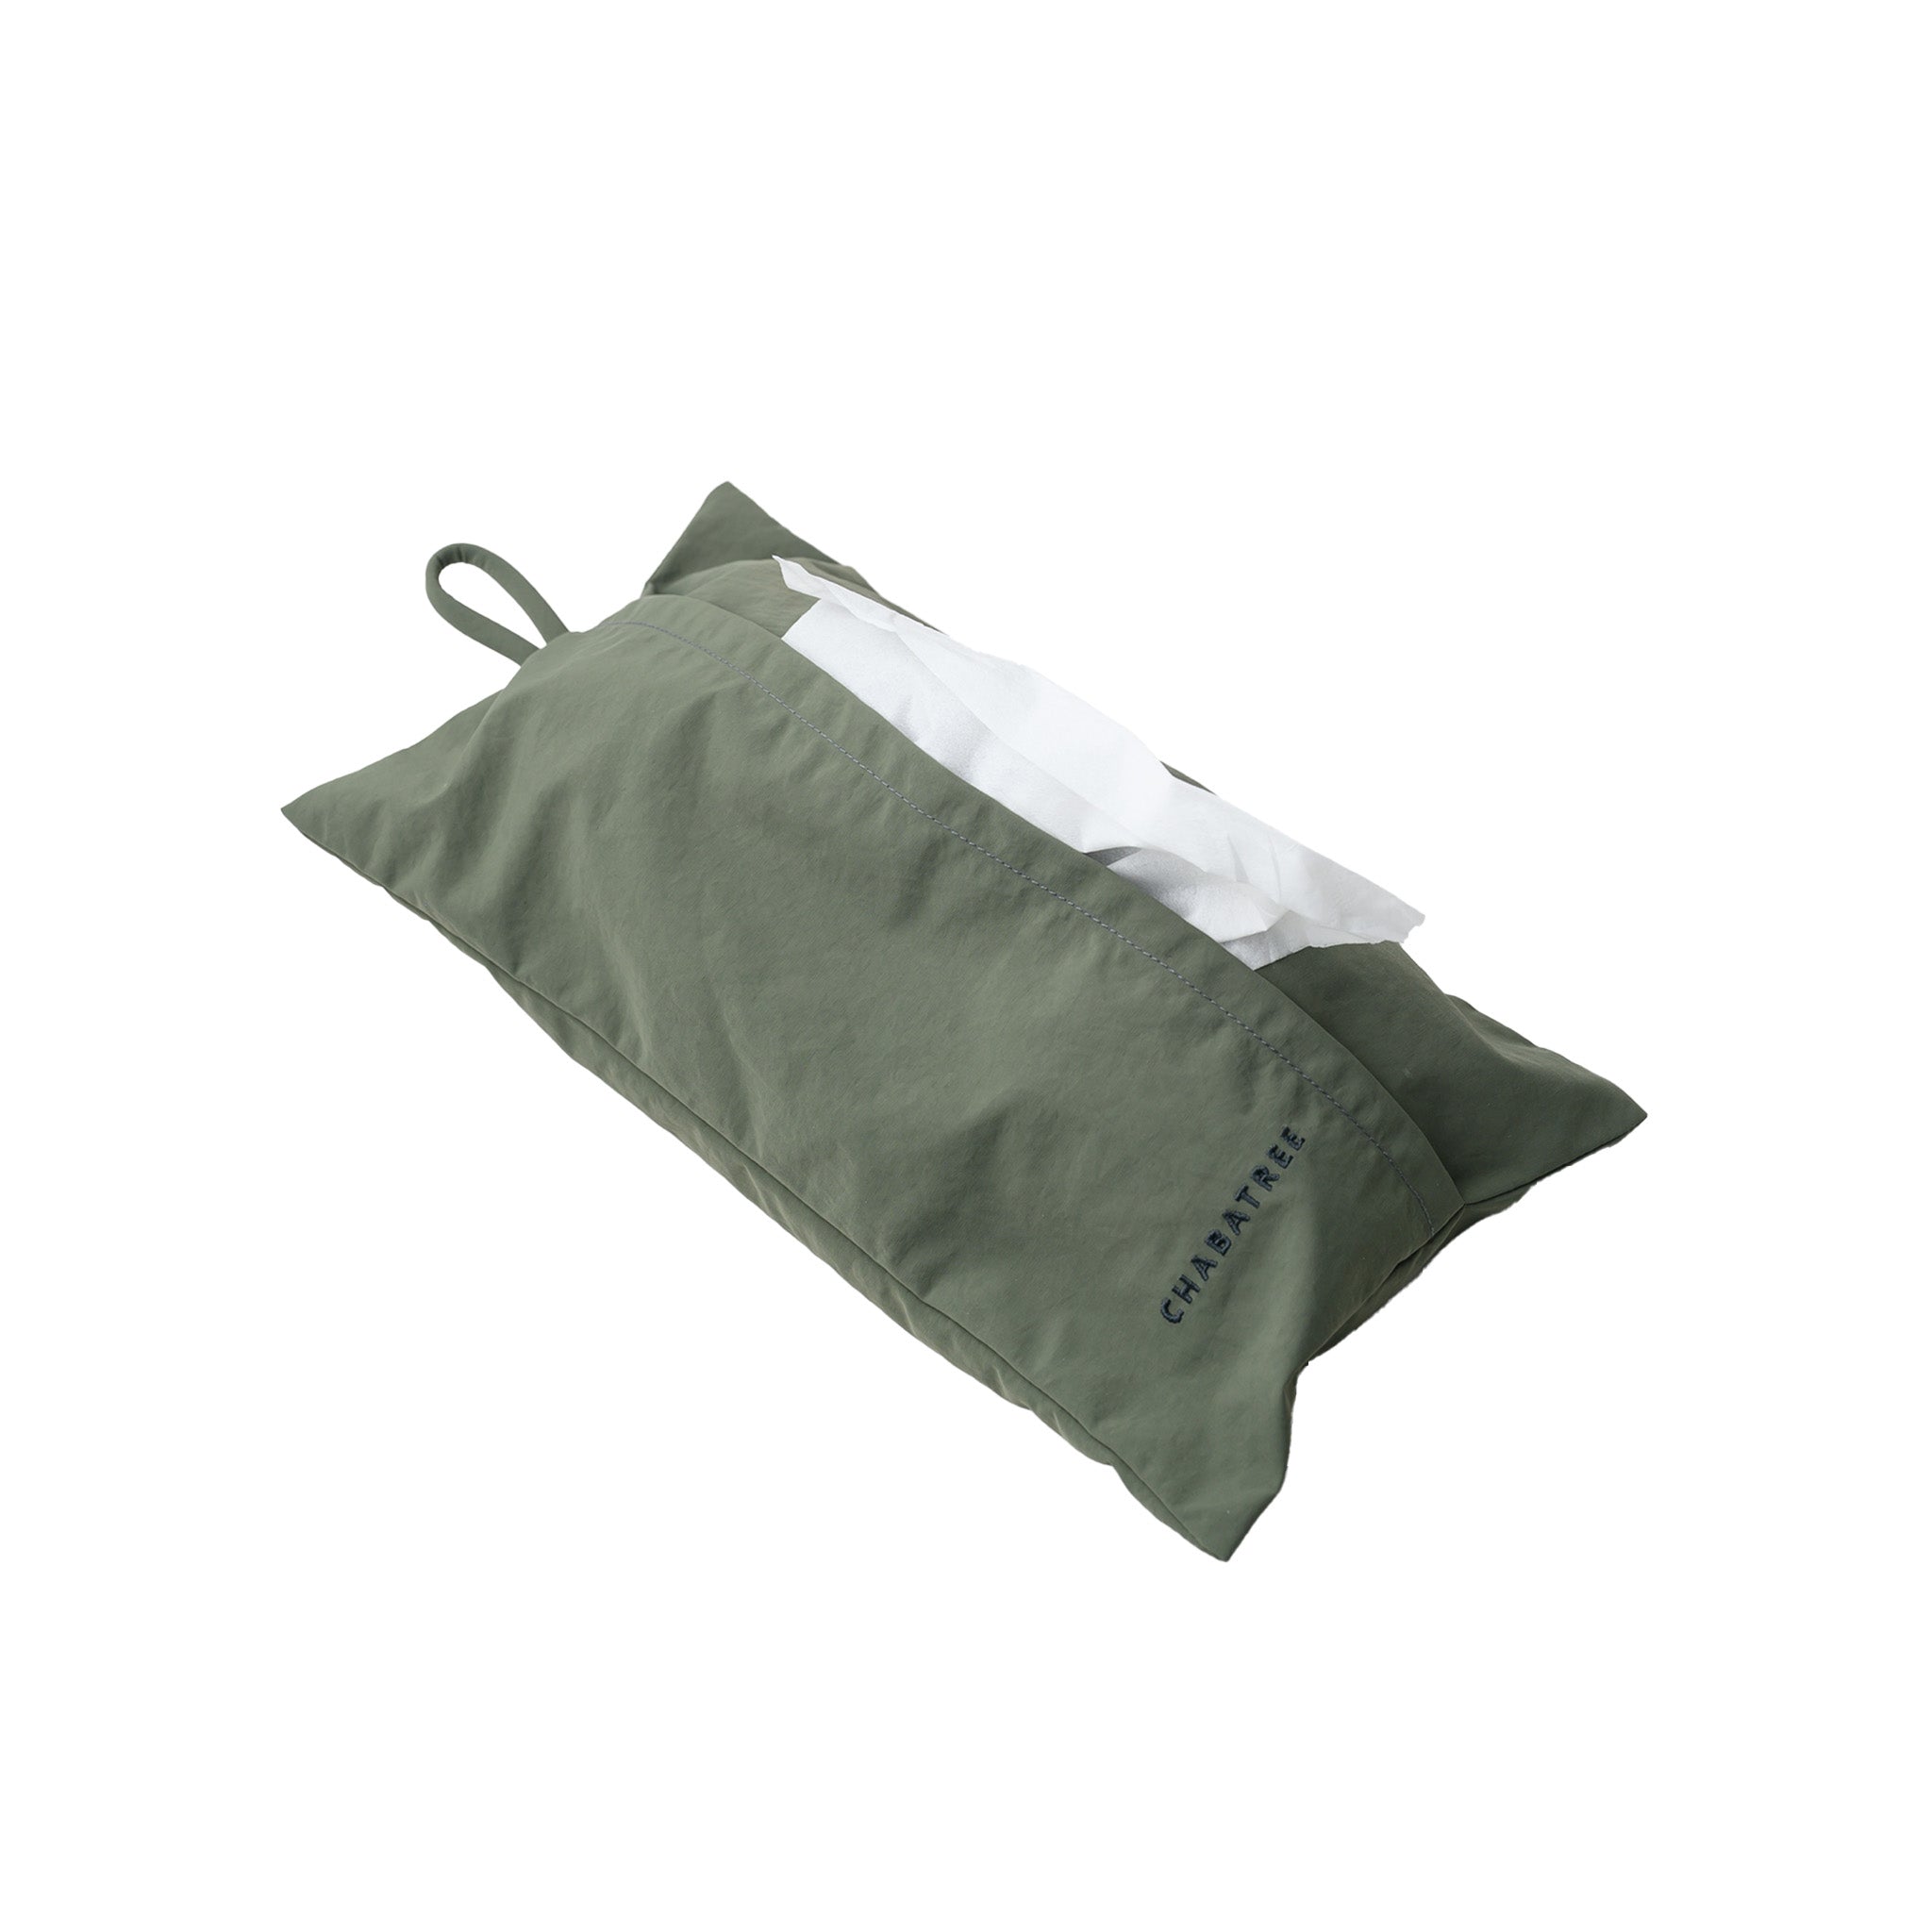 PAPER HAND TOWEL COVER (SOLDIER GREEN)